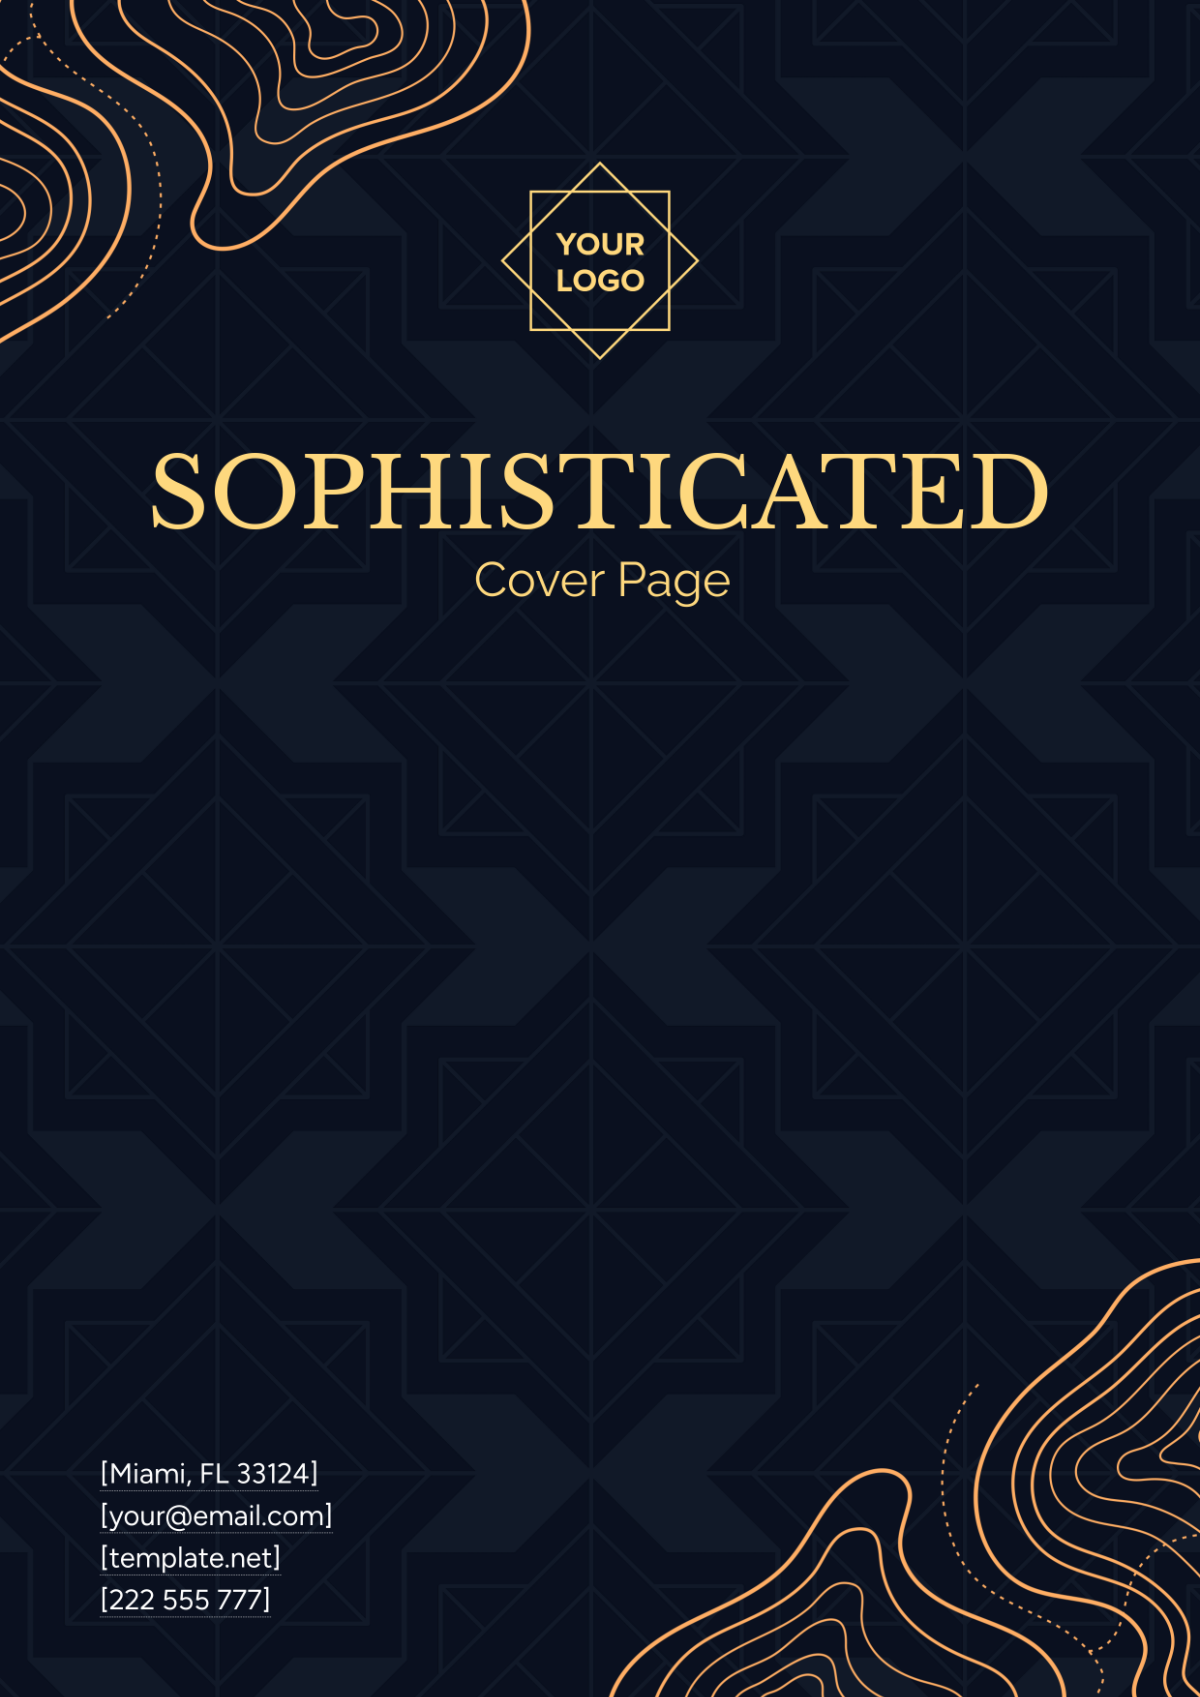 Sophisticated Cover Page Design